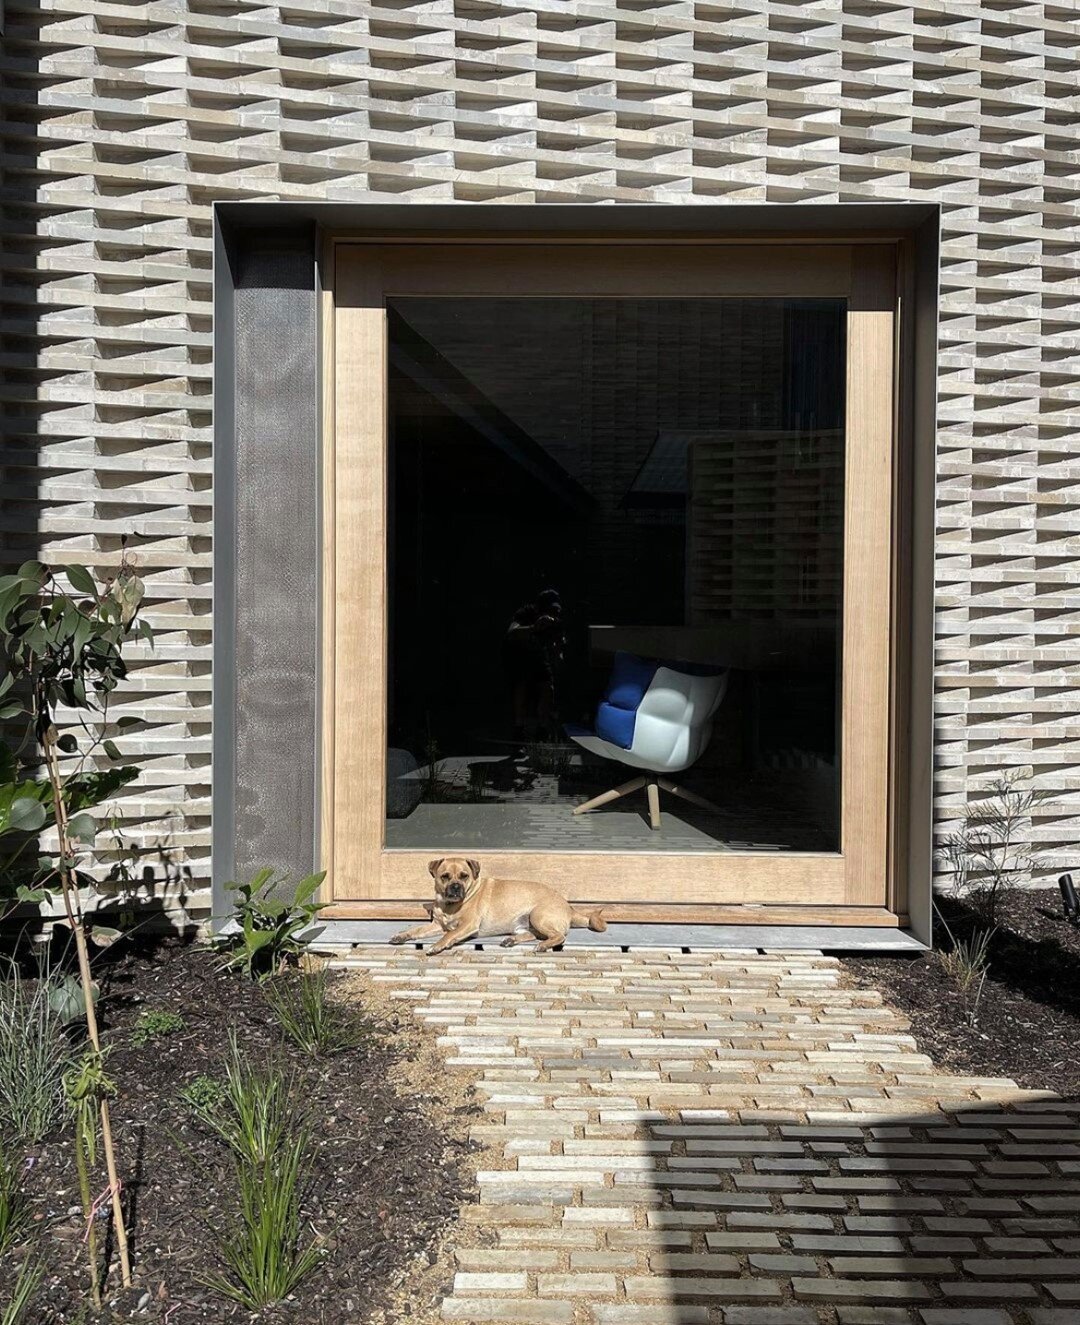 Committed to minimising waste materials at #jcbdividedhouse, designer @jonkclements repurposed leftover Krause brick ends as cobblestone paving (earning the approval of the ever-vigilant guard dog Tex 🐶).

@jcbarchitects @formofbluebrickhouse @bdpro